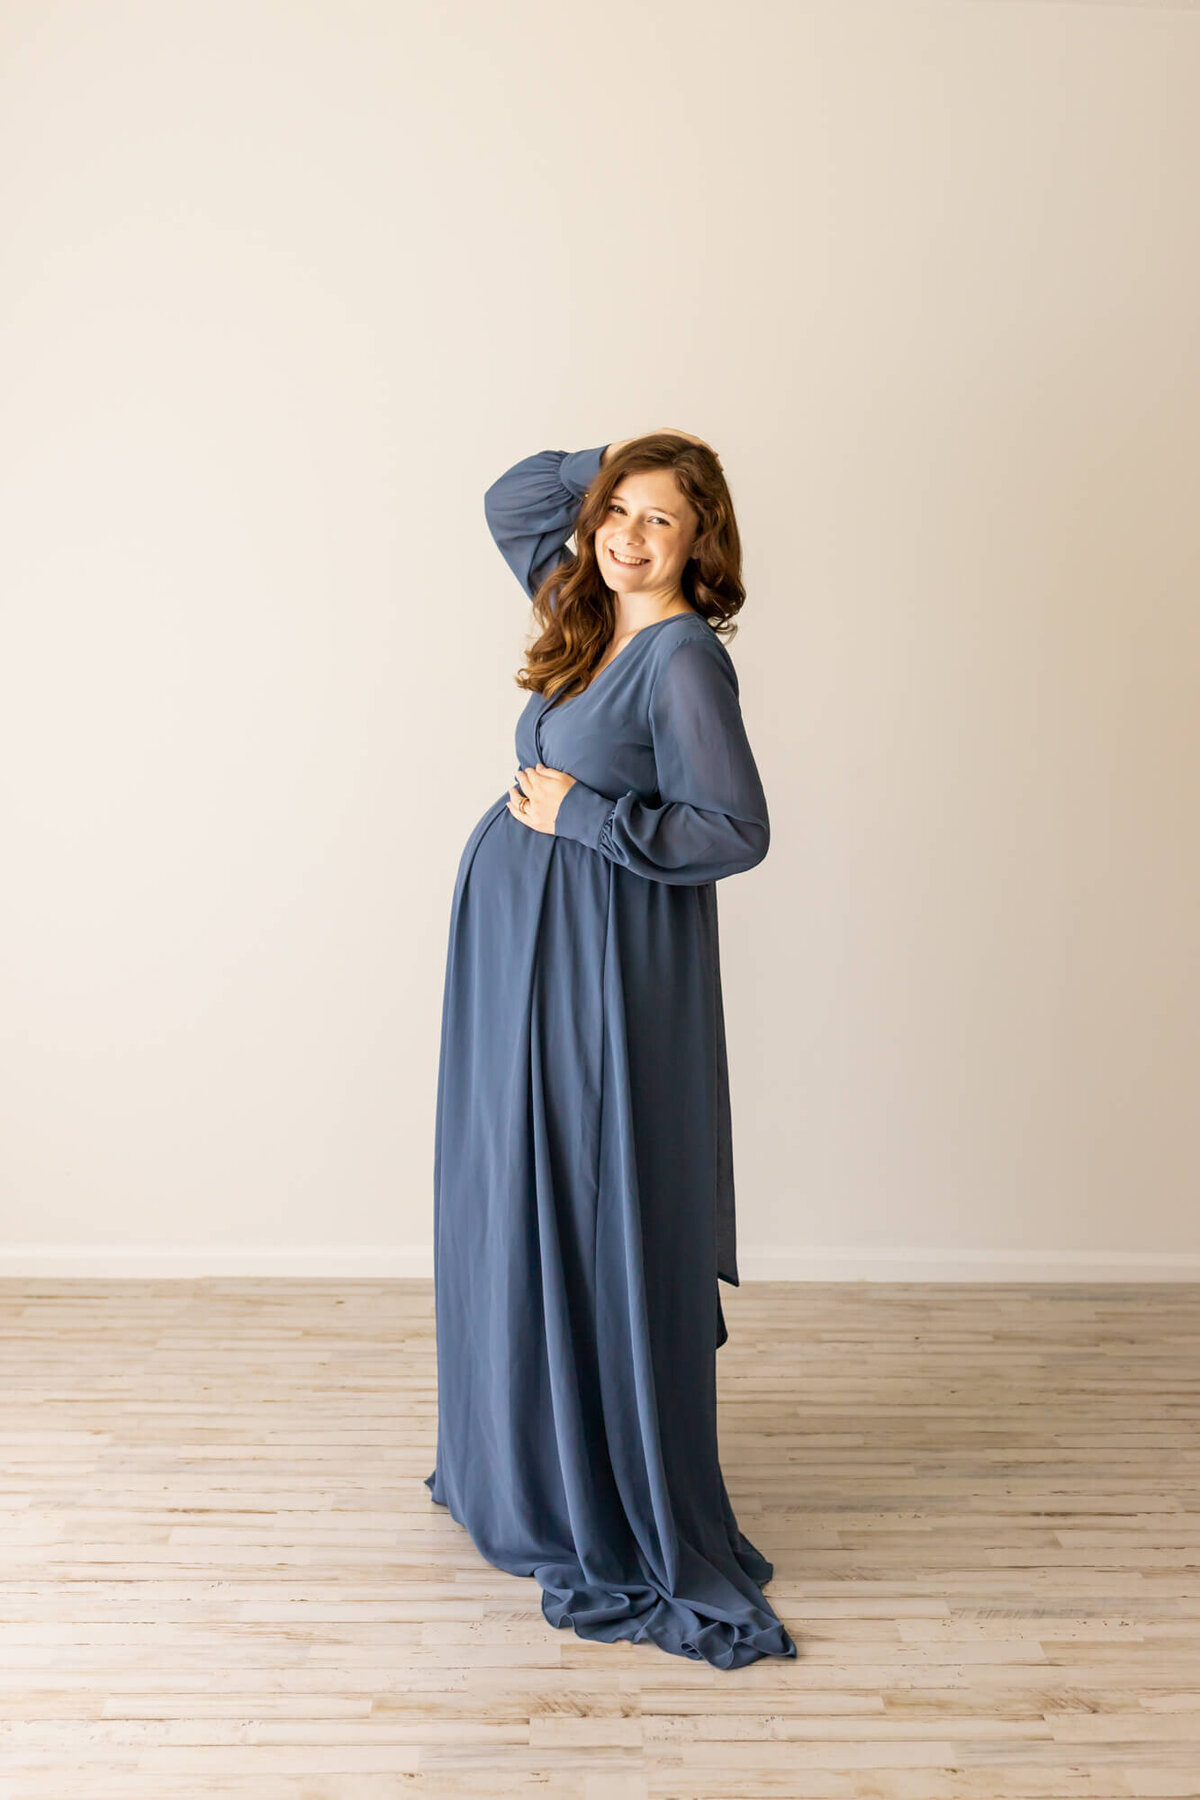 Mom to be in a flowy blue maternity dress